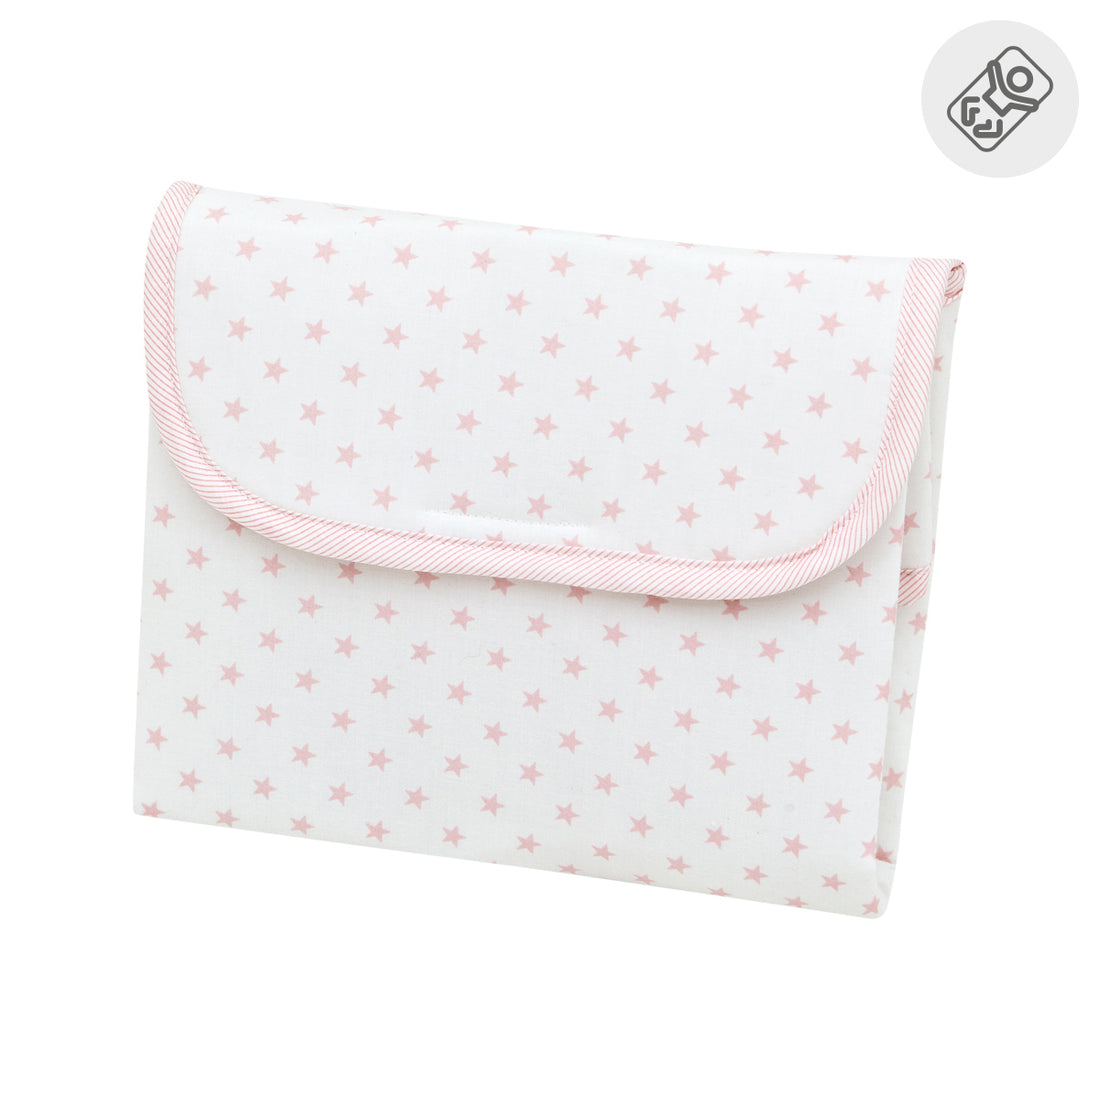 r&j-cambrass-sa-nappy-changer-travel-star-pink- (1)